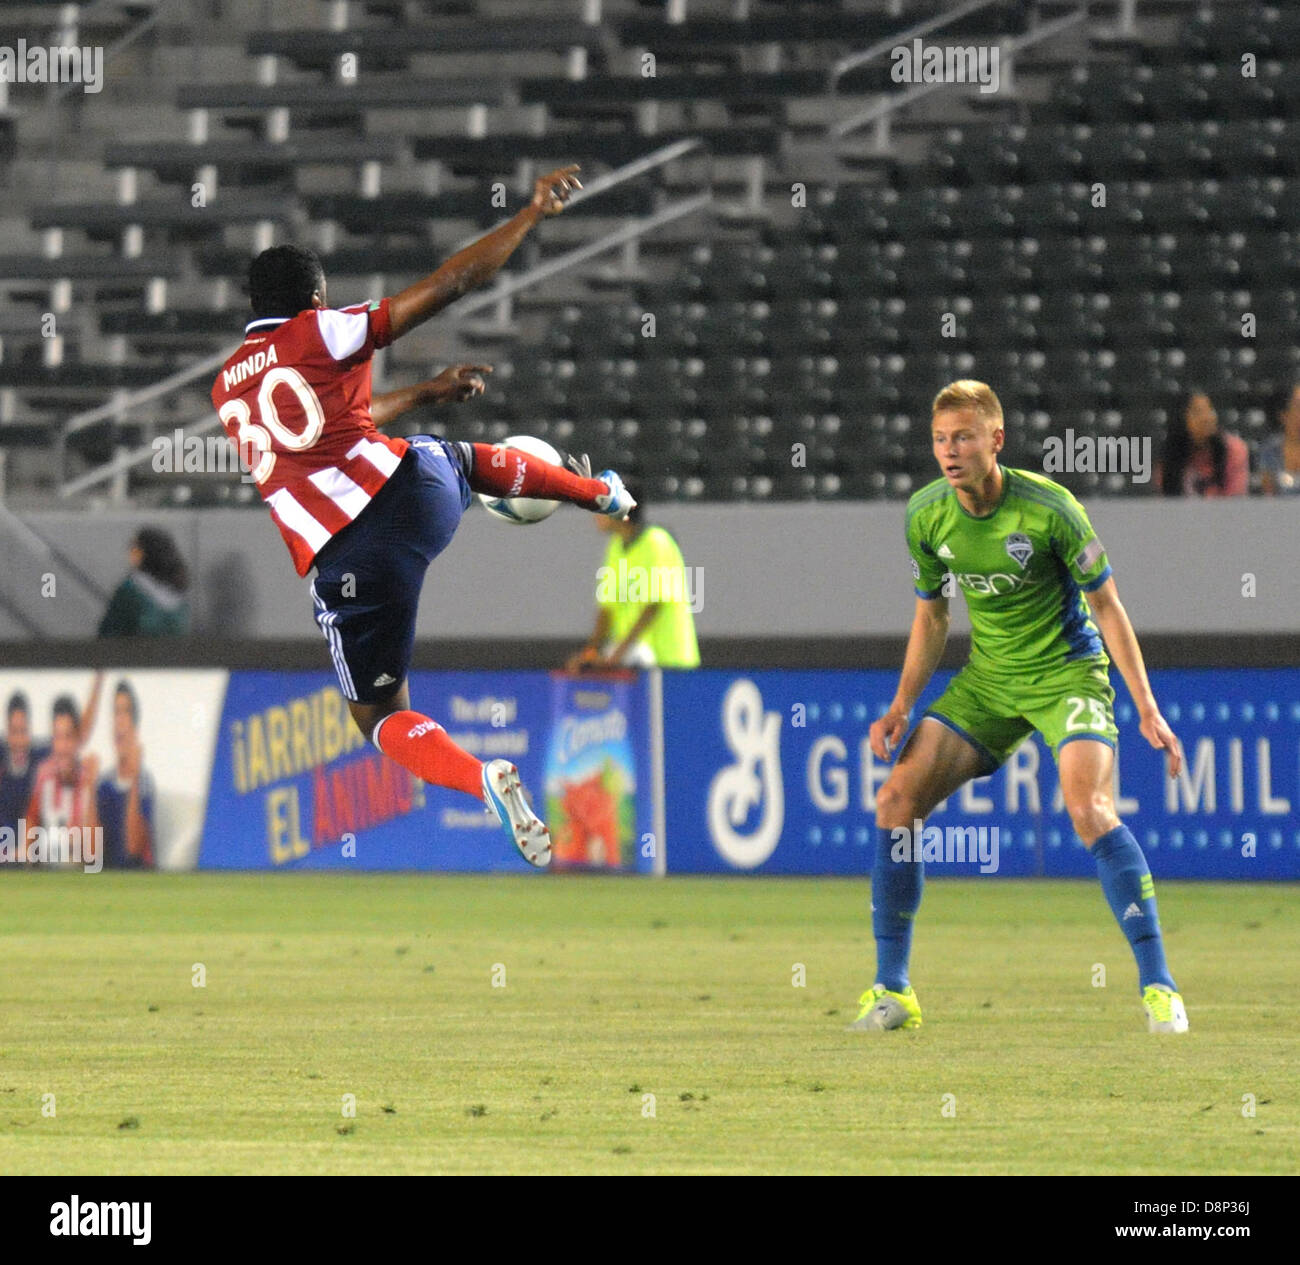 Carson, California, USA. 1st June, 2013. MLS-Major League Soccer- Chivas USA mid fielder OSWALDO MINDA receiving a pass in mid air as Seattle Sounders defender ANDY ROSE watches during the first half of play at The Home Depot Center, Carson, California, USA, June 1, 2013..Seattle went on to win the match 2 to 0...Credit Image  cr  Scott Mitchell/ZUMA Press (Credit Image: Credit:  Scott Mitchell/ZUMAPRESS.com/Alamy Live News) Stock Photo